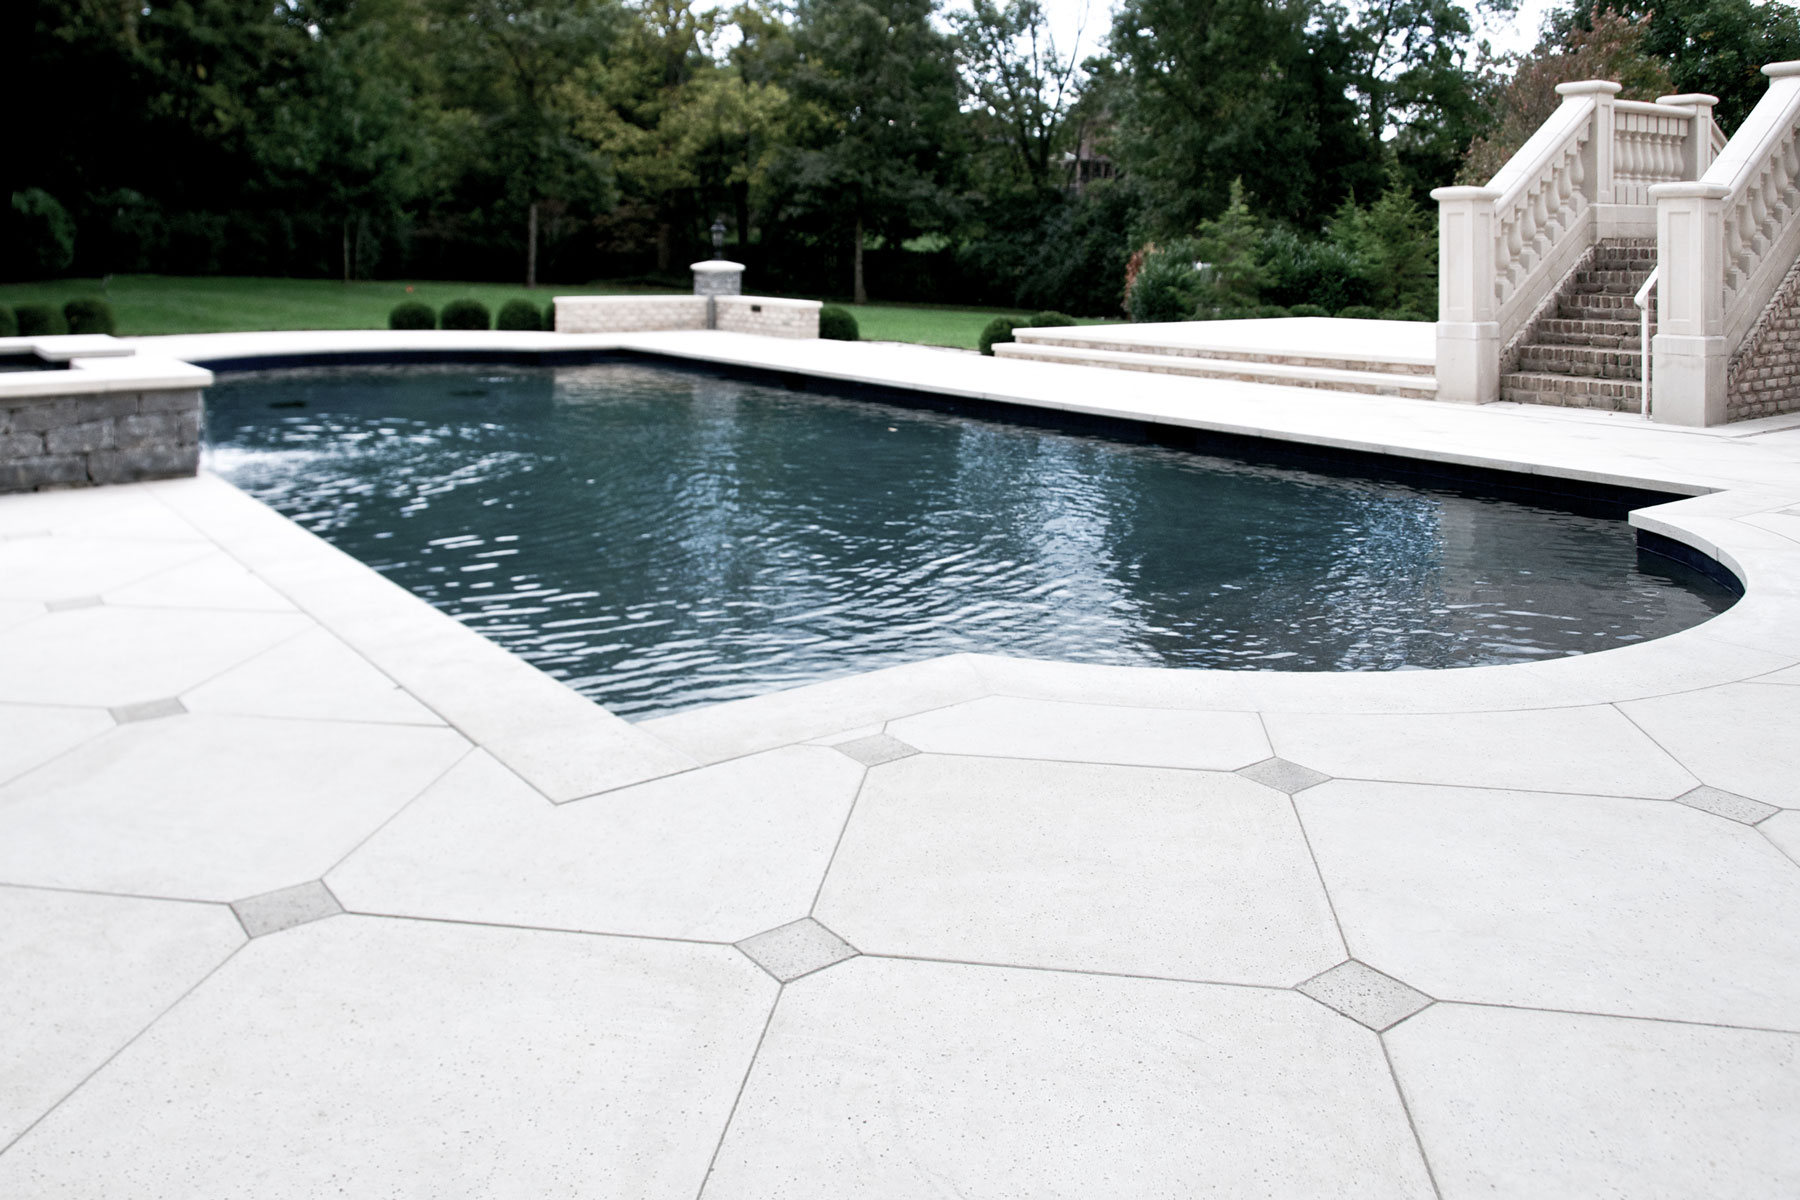 These custom pool coping tiles and pavers around pool fit to its unique shape